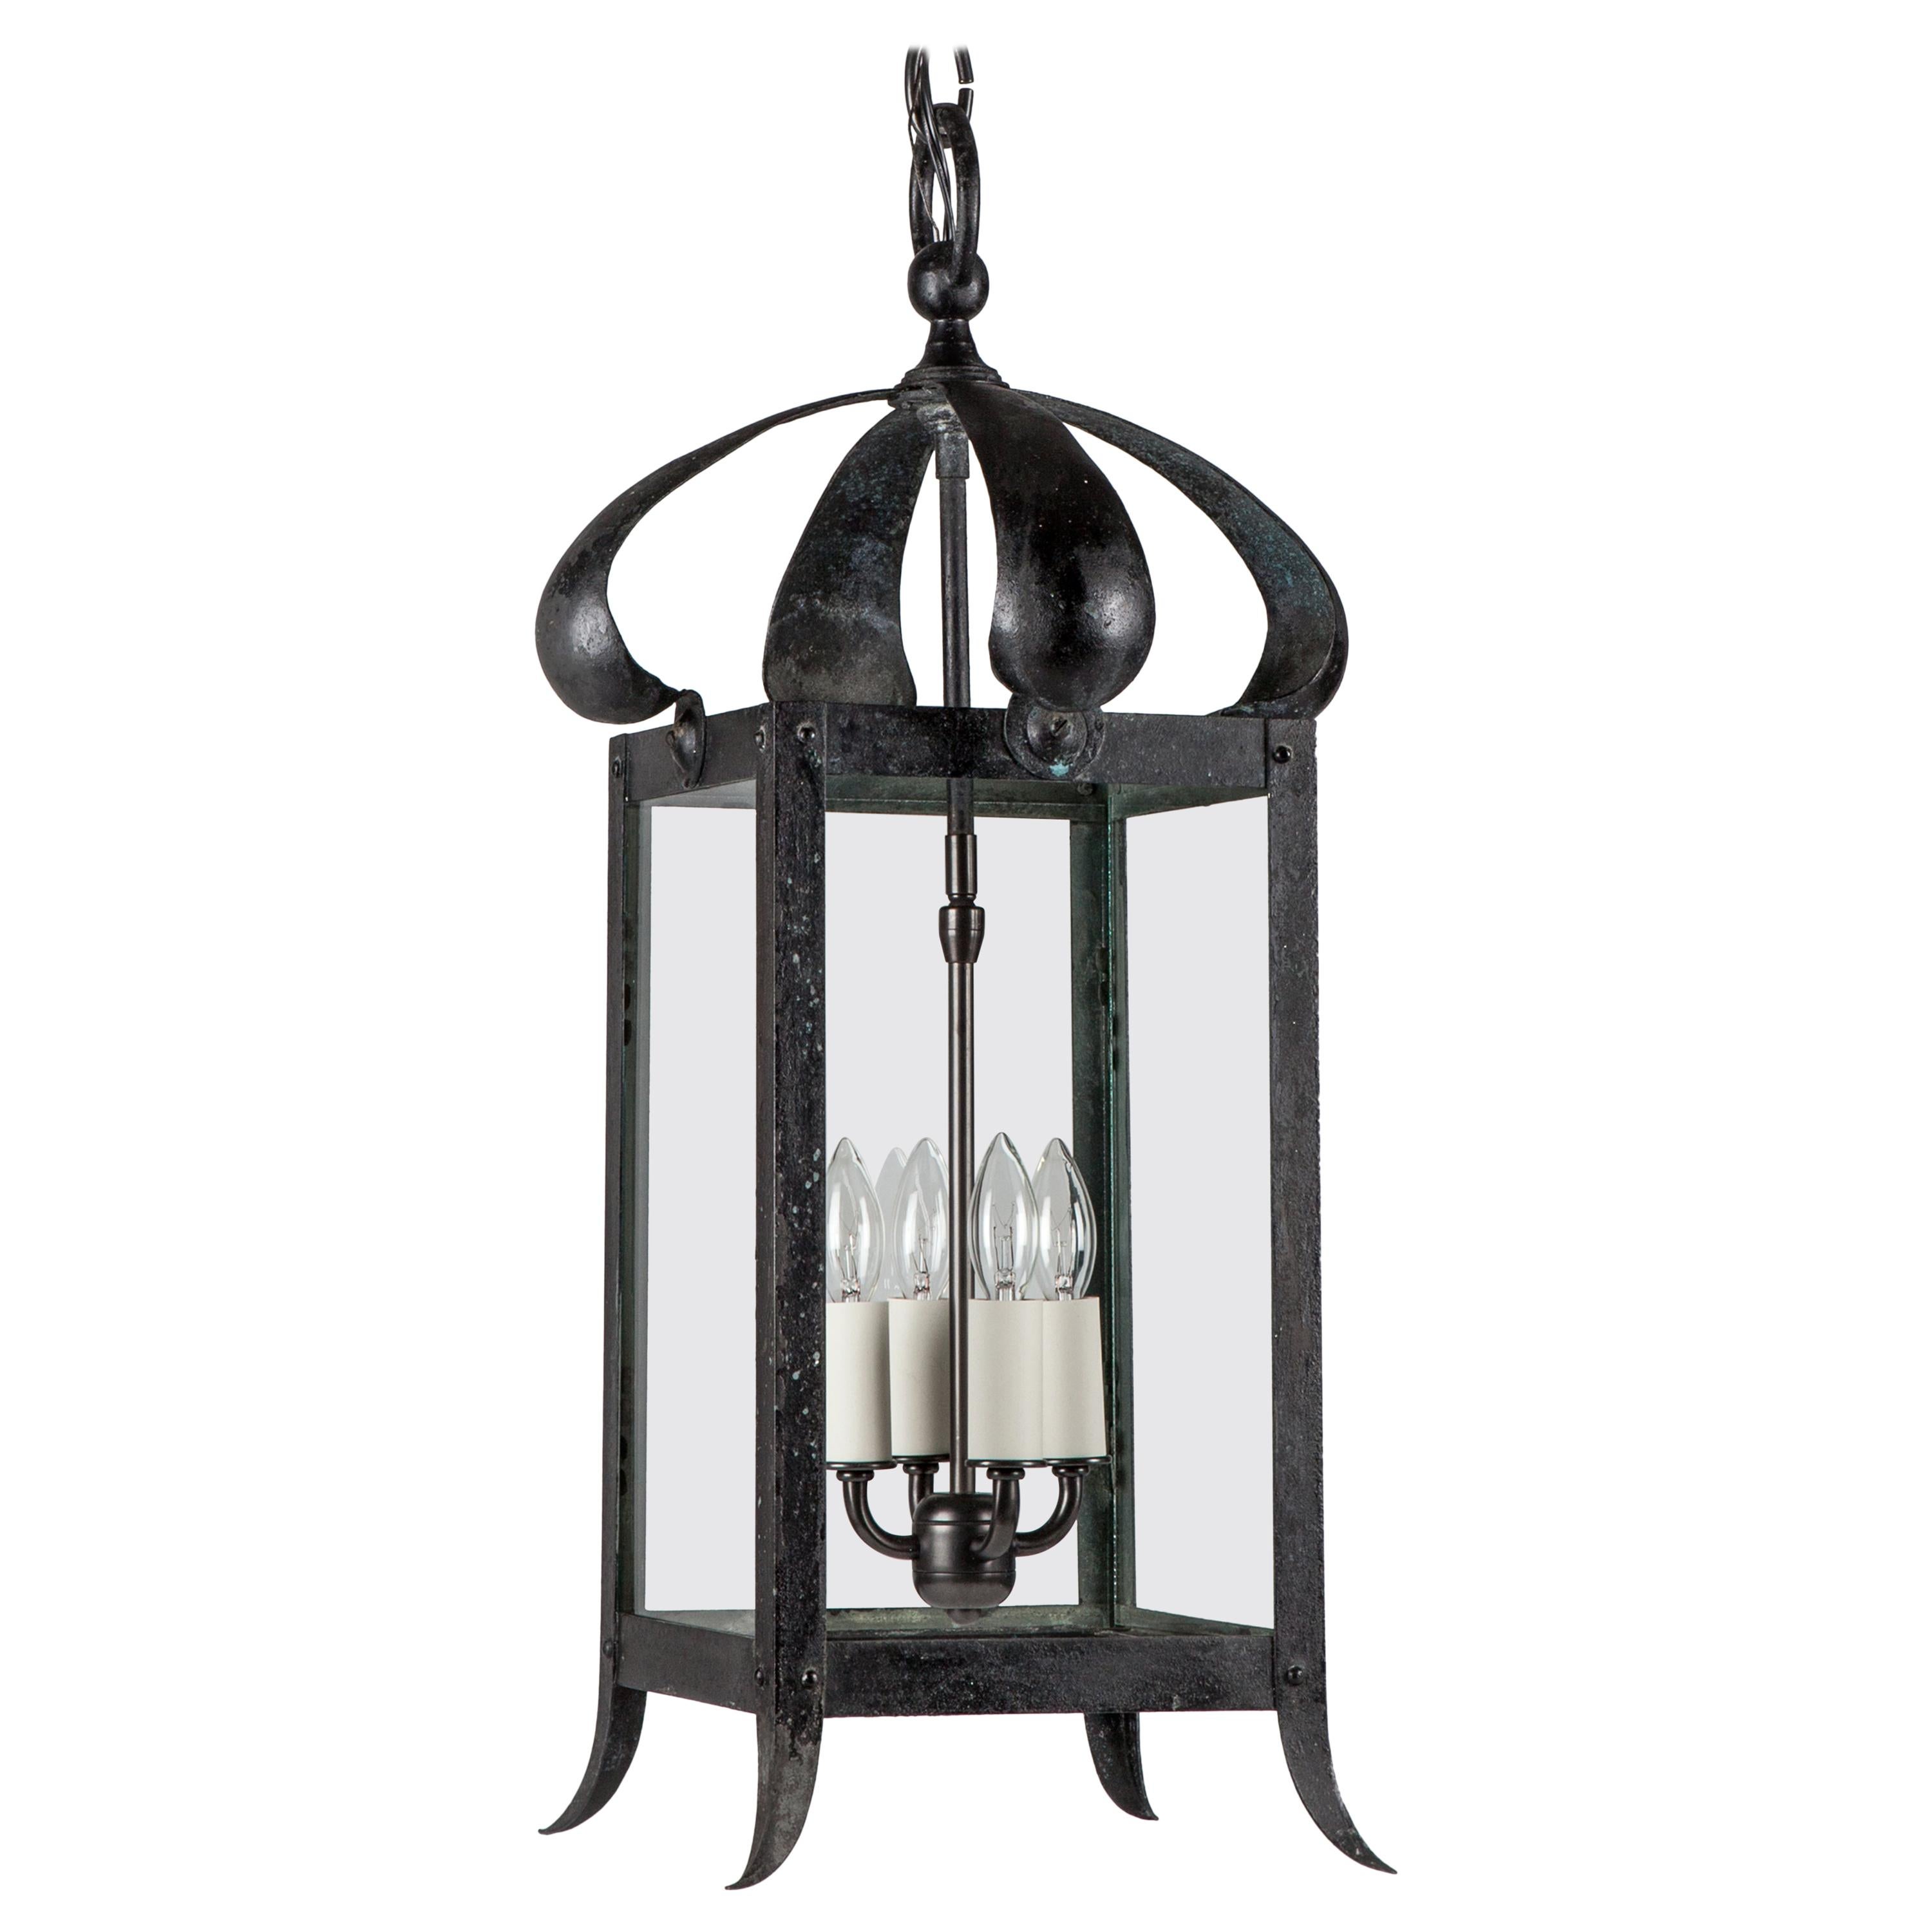 Antique Four Sided Blackened Wrought Brass Lantern with Clear Glass, Circa 1910s